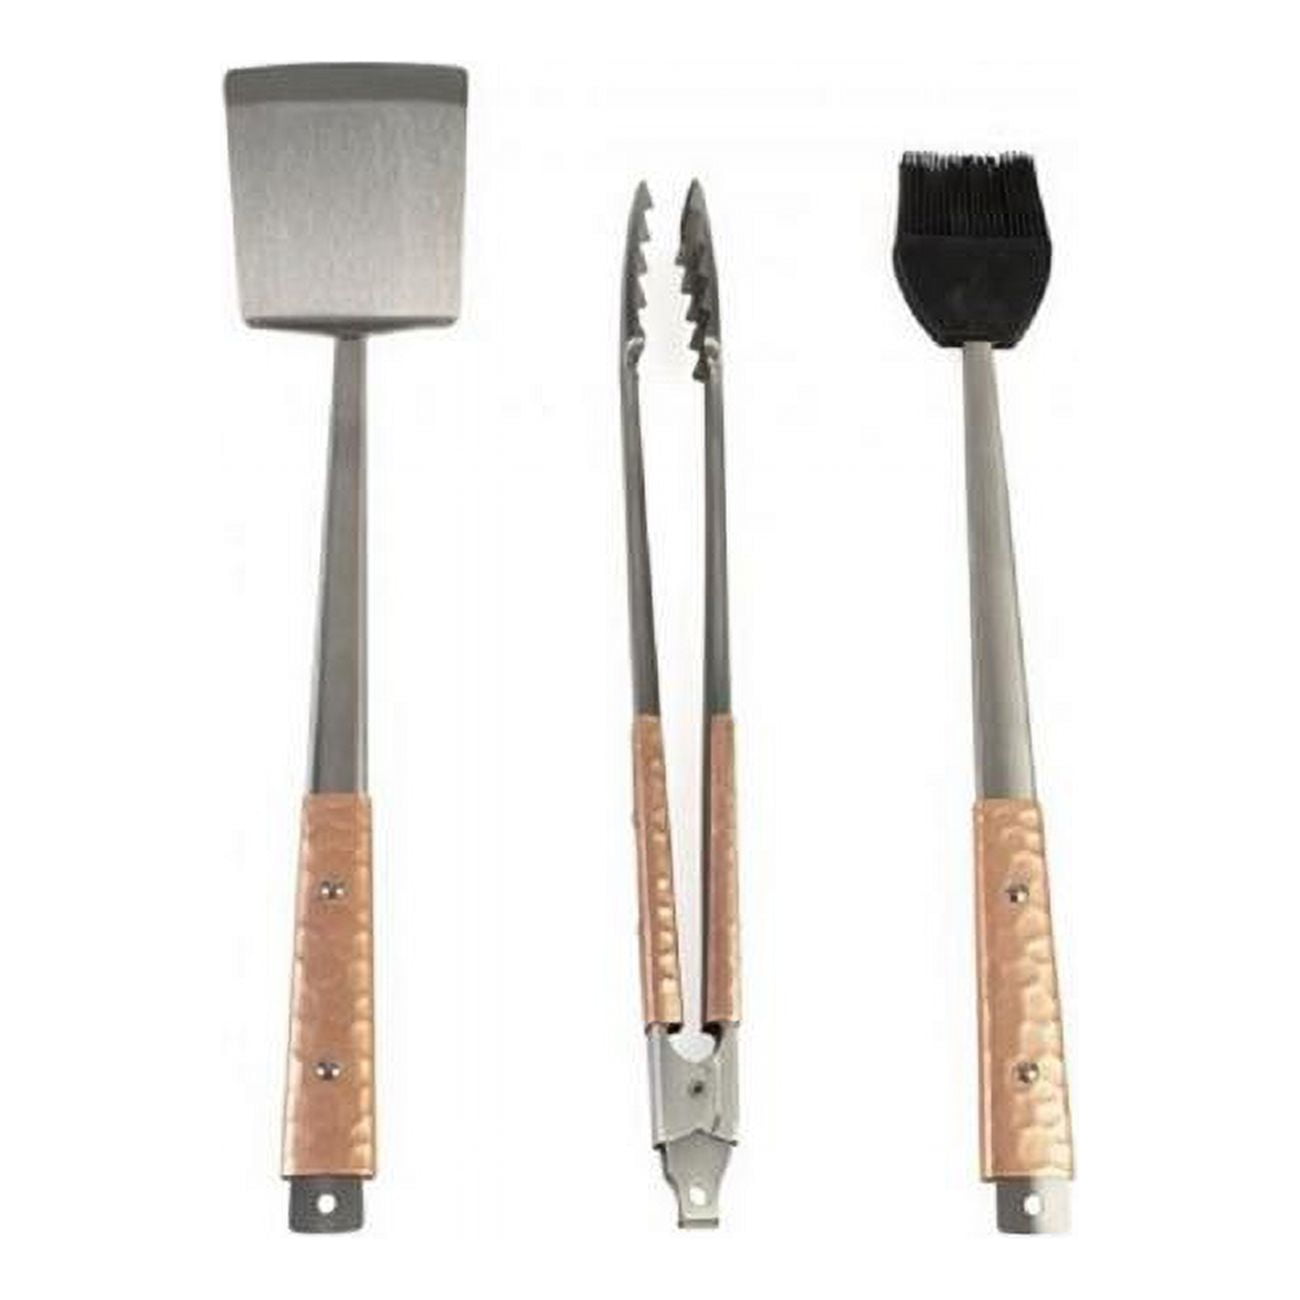 Picture of Charcoal Companion CC1095 Copper Handle 3 Pc BBQ Tool Set by Charcoal Companion